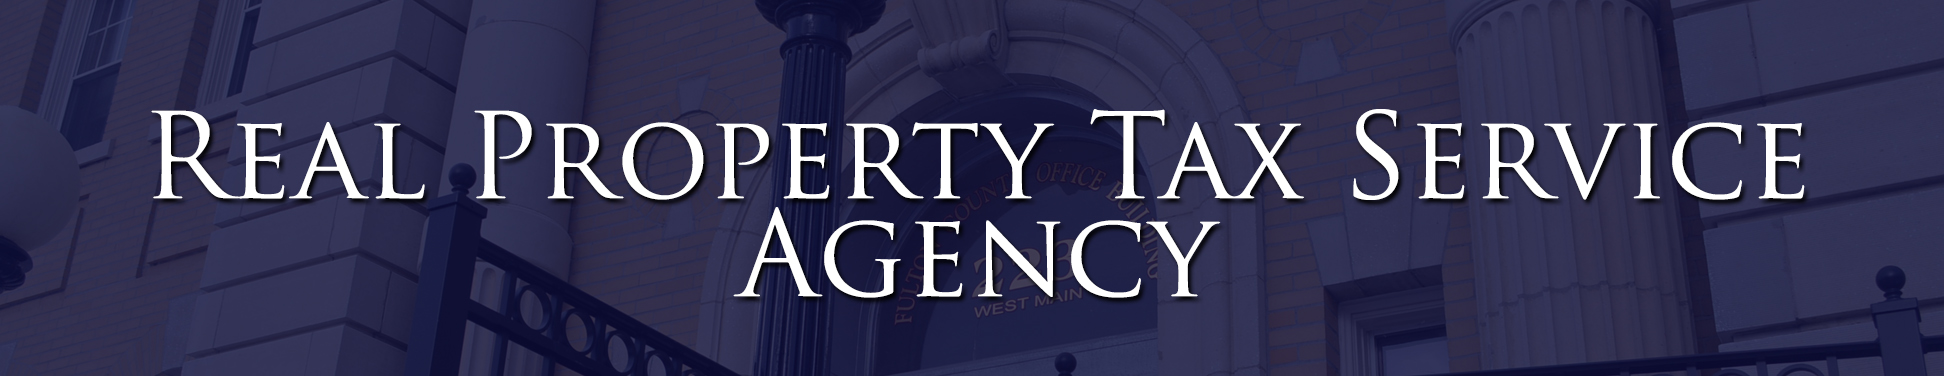 Image of Real Property Tax Service Agency